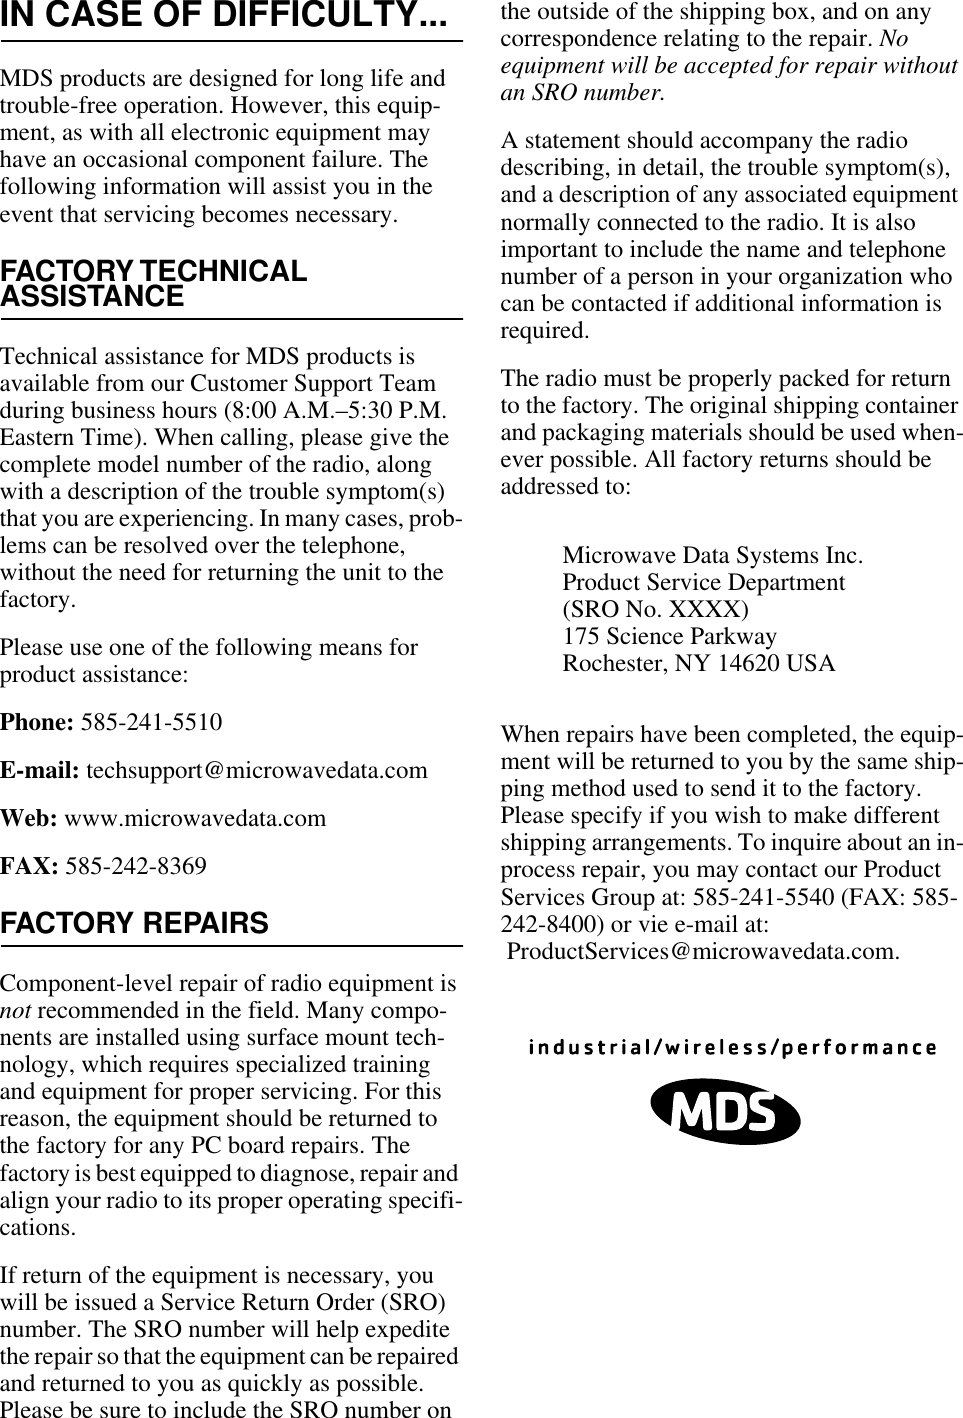 IN CASE OF DIFFICULTY...MDS products are designed for long life and trouble-free operation. However, this equip-ment, as with all electronic equipment may have an occasional component failure. The following information will assist you in the event that servicing becomes necessary.FACTORY TECHNICALASSISTANCETechnical assistance for MDS products is available from our Customer Support Team during business hours (8:00 A.M.–5:30 P.M. Eastern Time). When calling, please give the complete model number of the radio, along with a description of the trouble symptom(s) that you are experiencing. In many cases, prob-lems can be resolved over the telephone, without the need for returning the unit to the factory.Please use one of the following means for product assistance:Phone: 585-241-5510E-mail: techsupport@microwavedata.comWeb: www.microwavedata.comFAX: 585-242-8369FACTORY REPAIRSComponent-level repair of radio equipment is not recommended in the field. Many compo-nents are installed using surface mount tech-nology, which requires specialized training and equipment for proper servicing. For this reason, the equipment should be returned to the factory for any PC board repairs. The factory is best equipped to diagnose, repair and align your radio to its proper operating specifi-cations.If return of the equipment is necessary, you will be issued a Service Return Order (SRO) number. The SRO number will help expedite the repair so that the equipment can be repaired and returned to you as quickly as possible. Please be sure to include the SRO number on the outside of the shipping box, and on any correspondence relating to the repair. No equipment will be accepted for repair without an SRO number.A statement should accompany the radio describing, in detail, the trouble symptom(s), and a description of any associated equipment normally connected to the radio. It is also important to include the name and telephone number of a person in your organization who can be contacted if additional information is required.The radio must be properly packed for return to the factory. The original shipping container and packaging materials should be used when-ever possible. All factory returns should be addressed to:When repairs have been completed, the equip-ment will be returned to you by the same ship-ping method used to send it to the factory. Please specify if you wish to make different shipping arrangements. To inquire about an in-process repair, you may contact our Product Services Group at: 585-241-5540 (FAX: 585-242-8400) or vie e-mail at: ProductServices@microwavedata.com.Microwave Data Systems Inc.Product Service Department(SRO No. XXXX)175 Science ParkwayRochester, NY 14620 USA